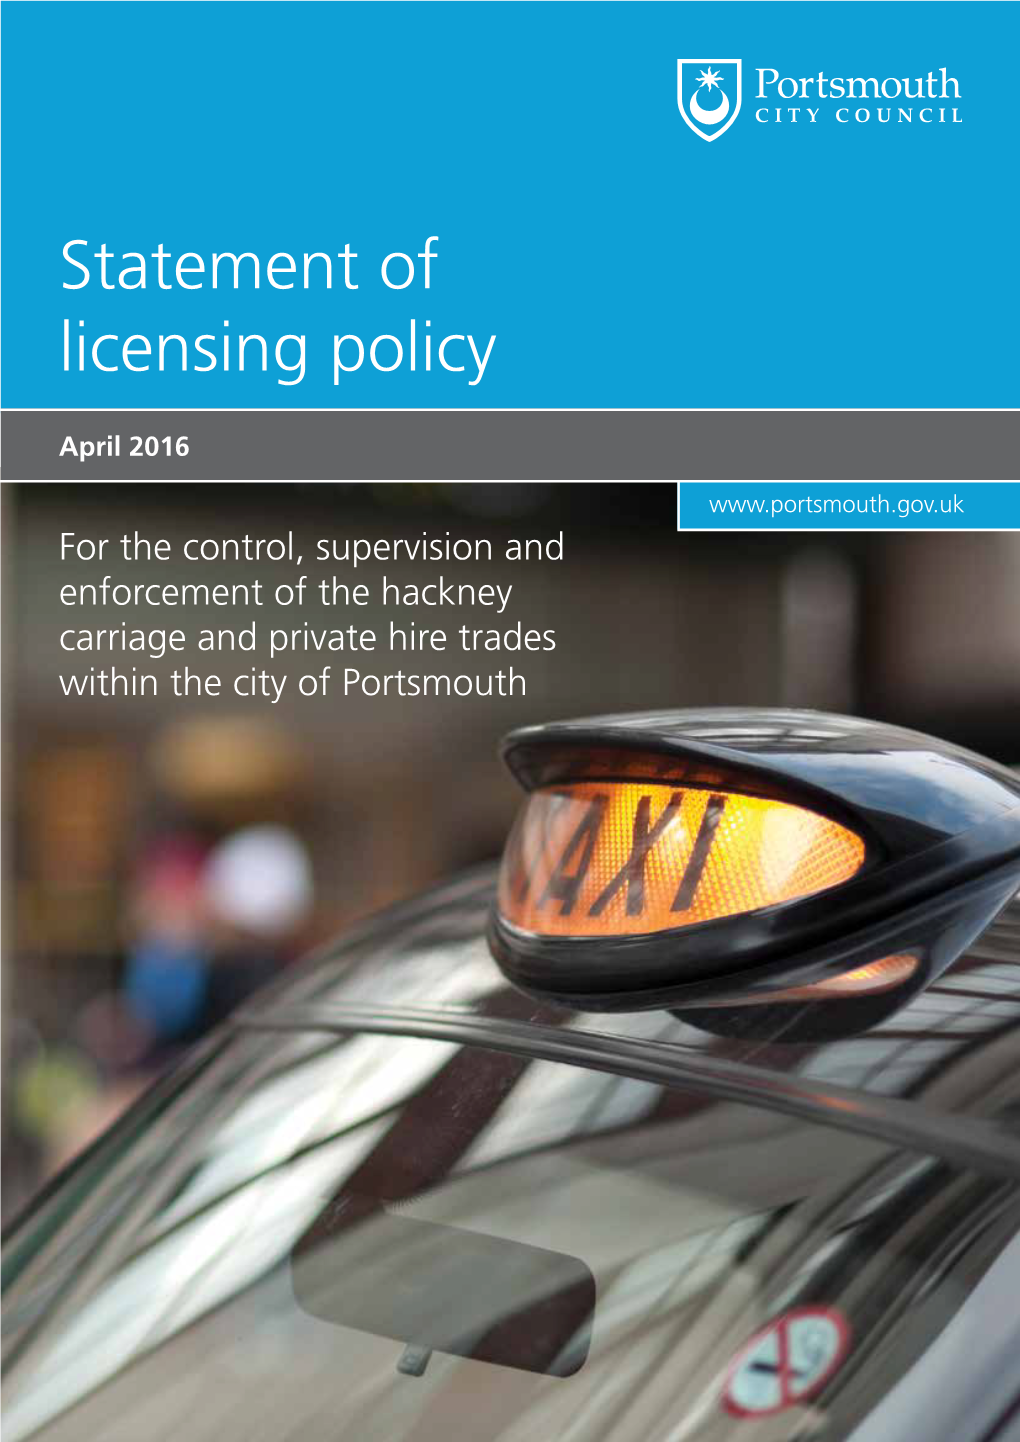 Statement of Licensing Policy